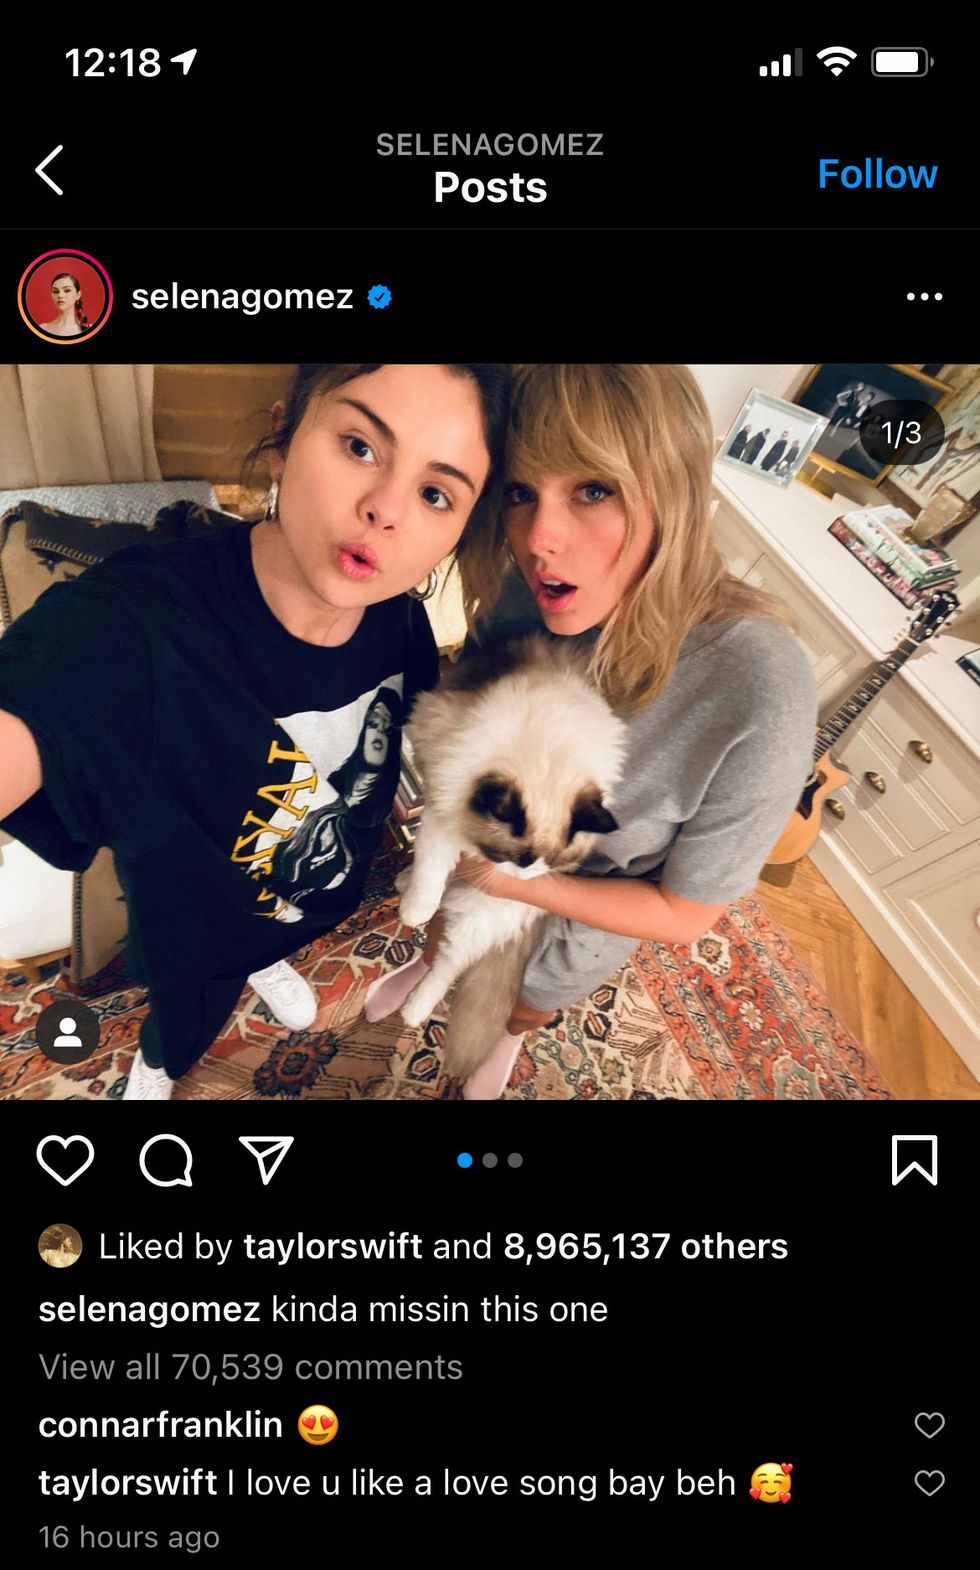 taylor swift's like and comment on selena's post